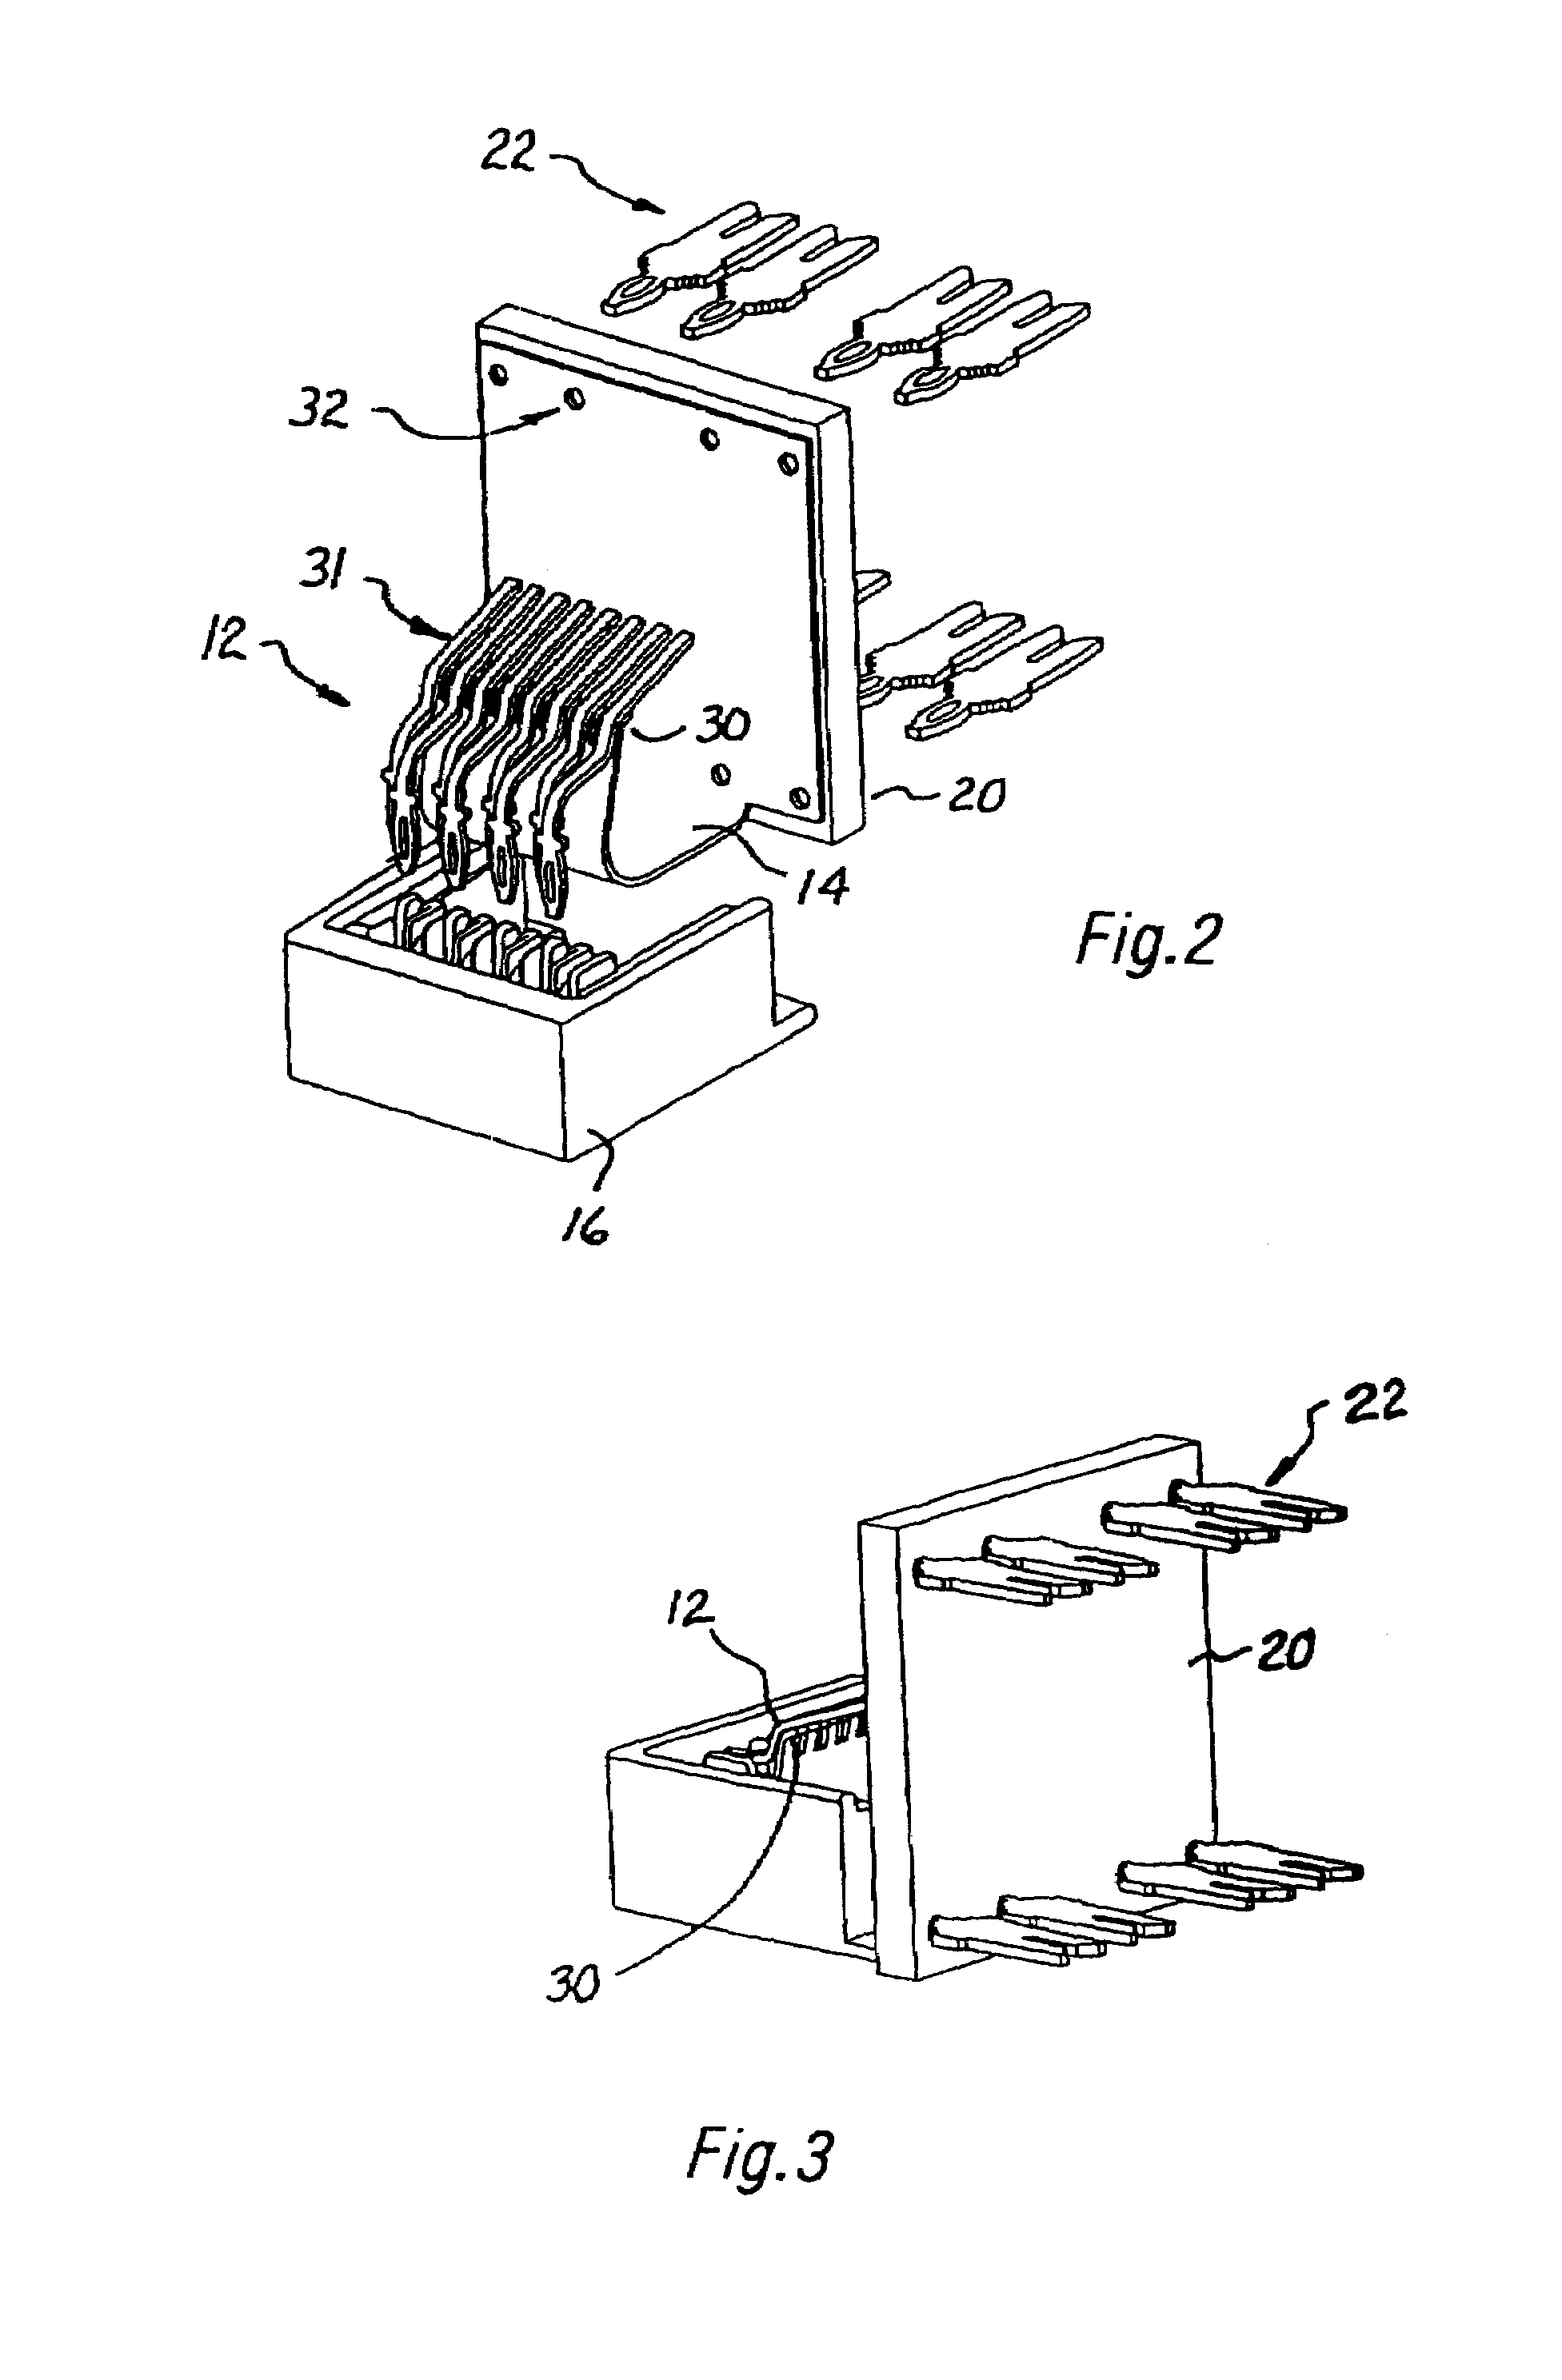 Methods and apparatus for reducing crosstalk in electrical connectors